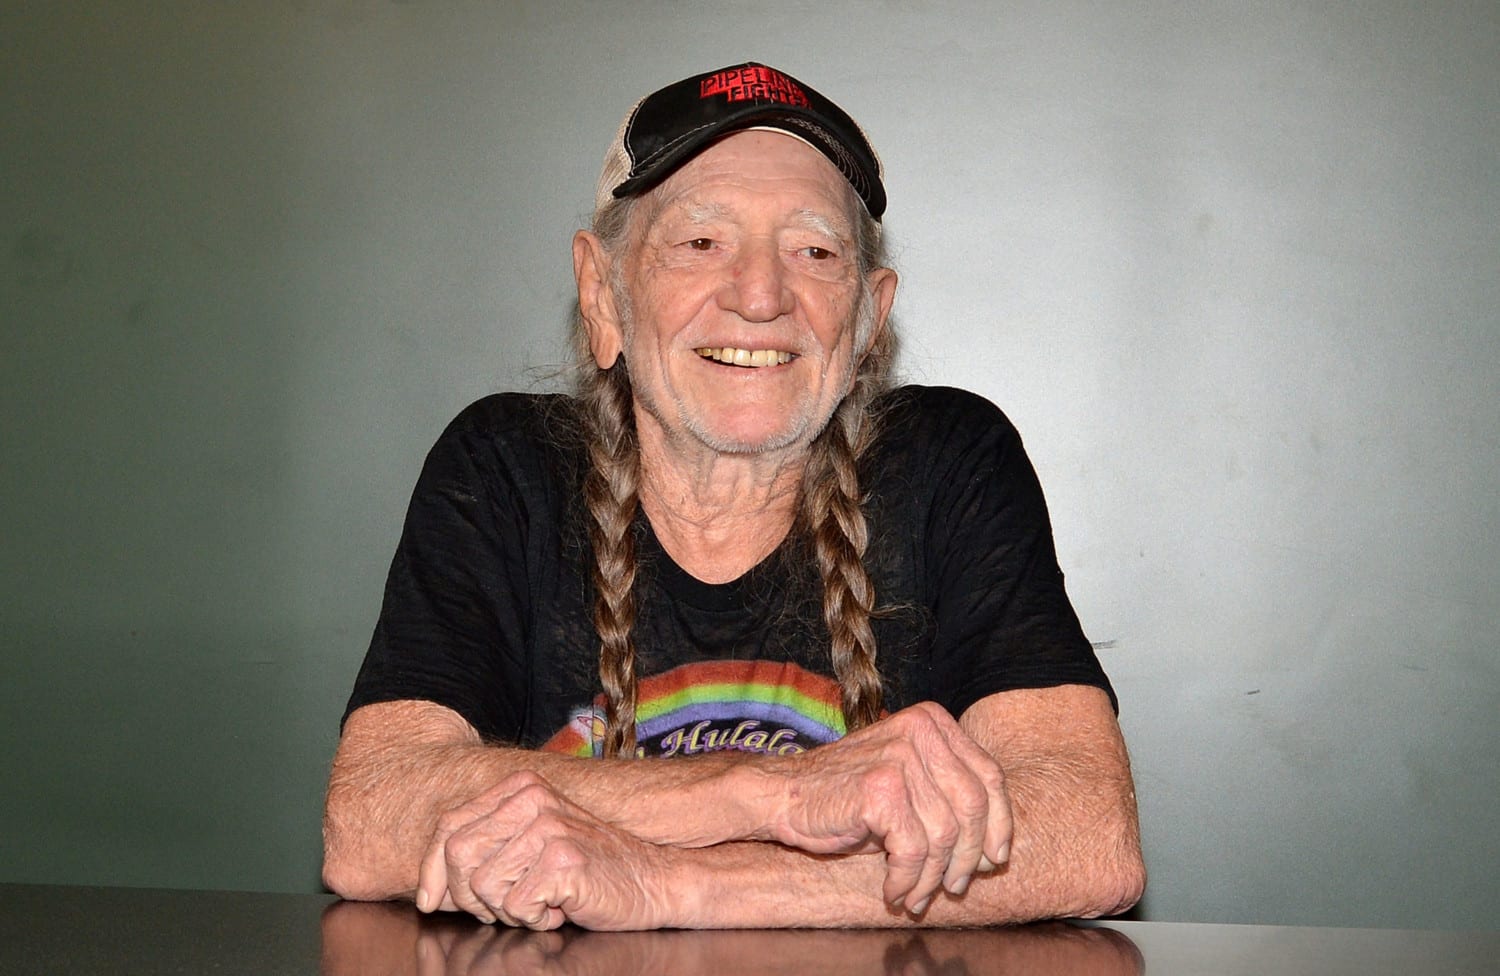 Willie Nelson Signs Copies Of His Book 'It's A Long Story: My Life'